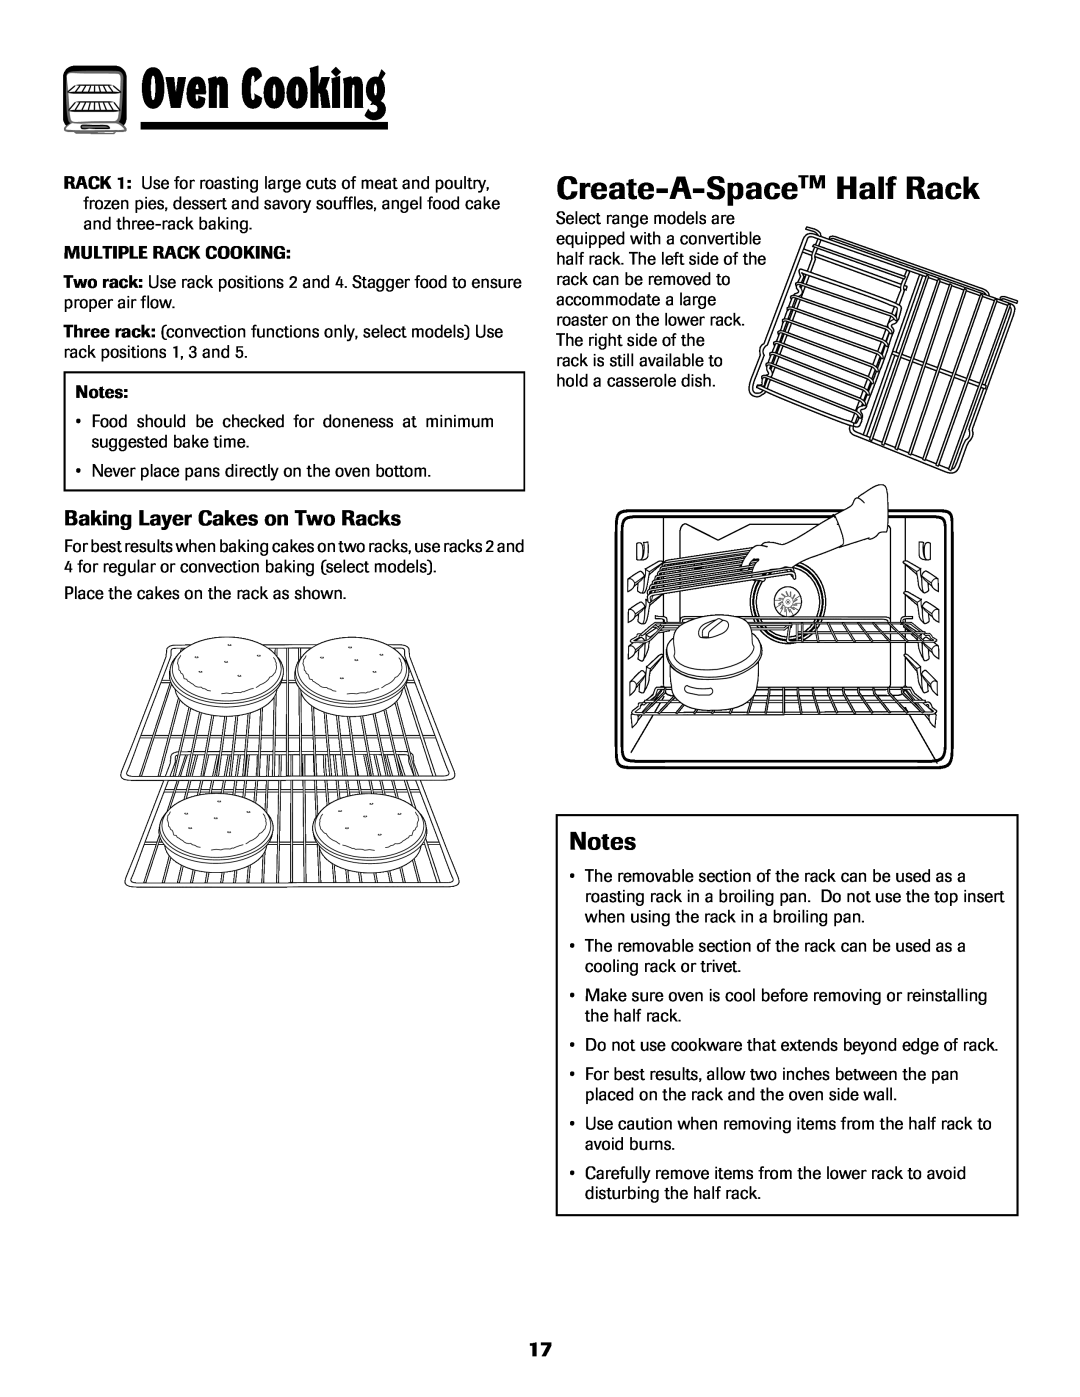 Maytag MGS5875BDW important safety instructions Create-A-SpaceTM Half Rack, Baking Layer Cakes on Two Racks, Oven Cooking 